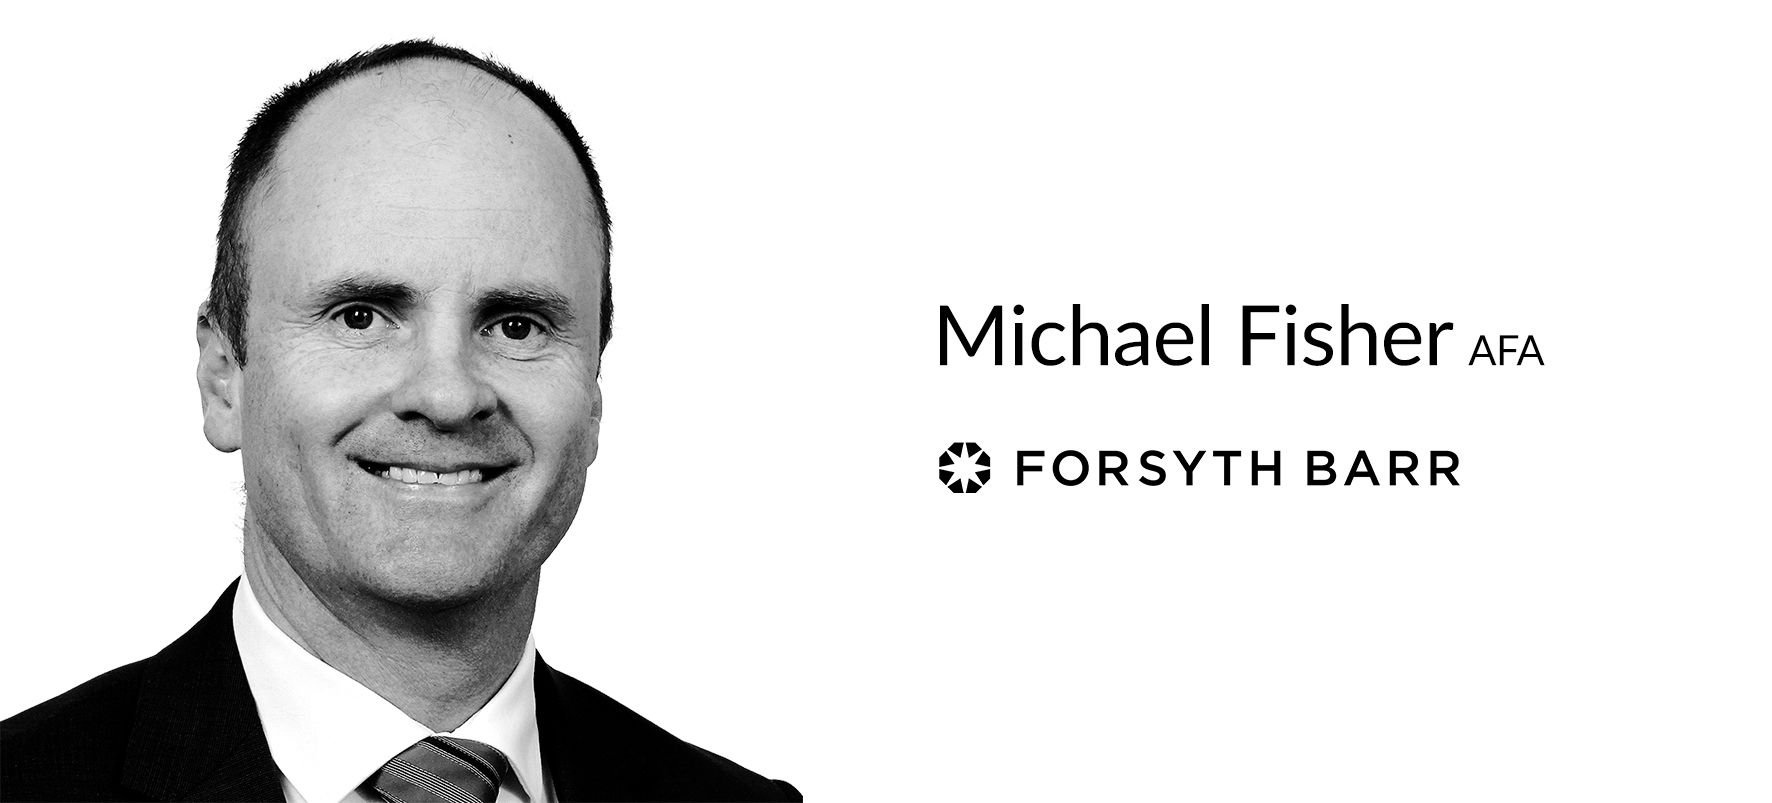 Forsyth Barr introduces Michael Fisher